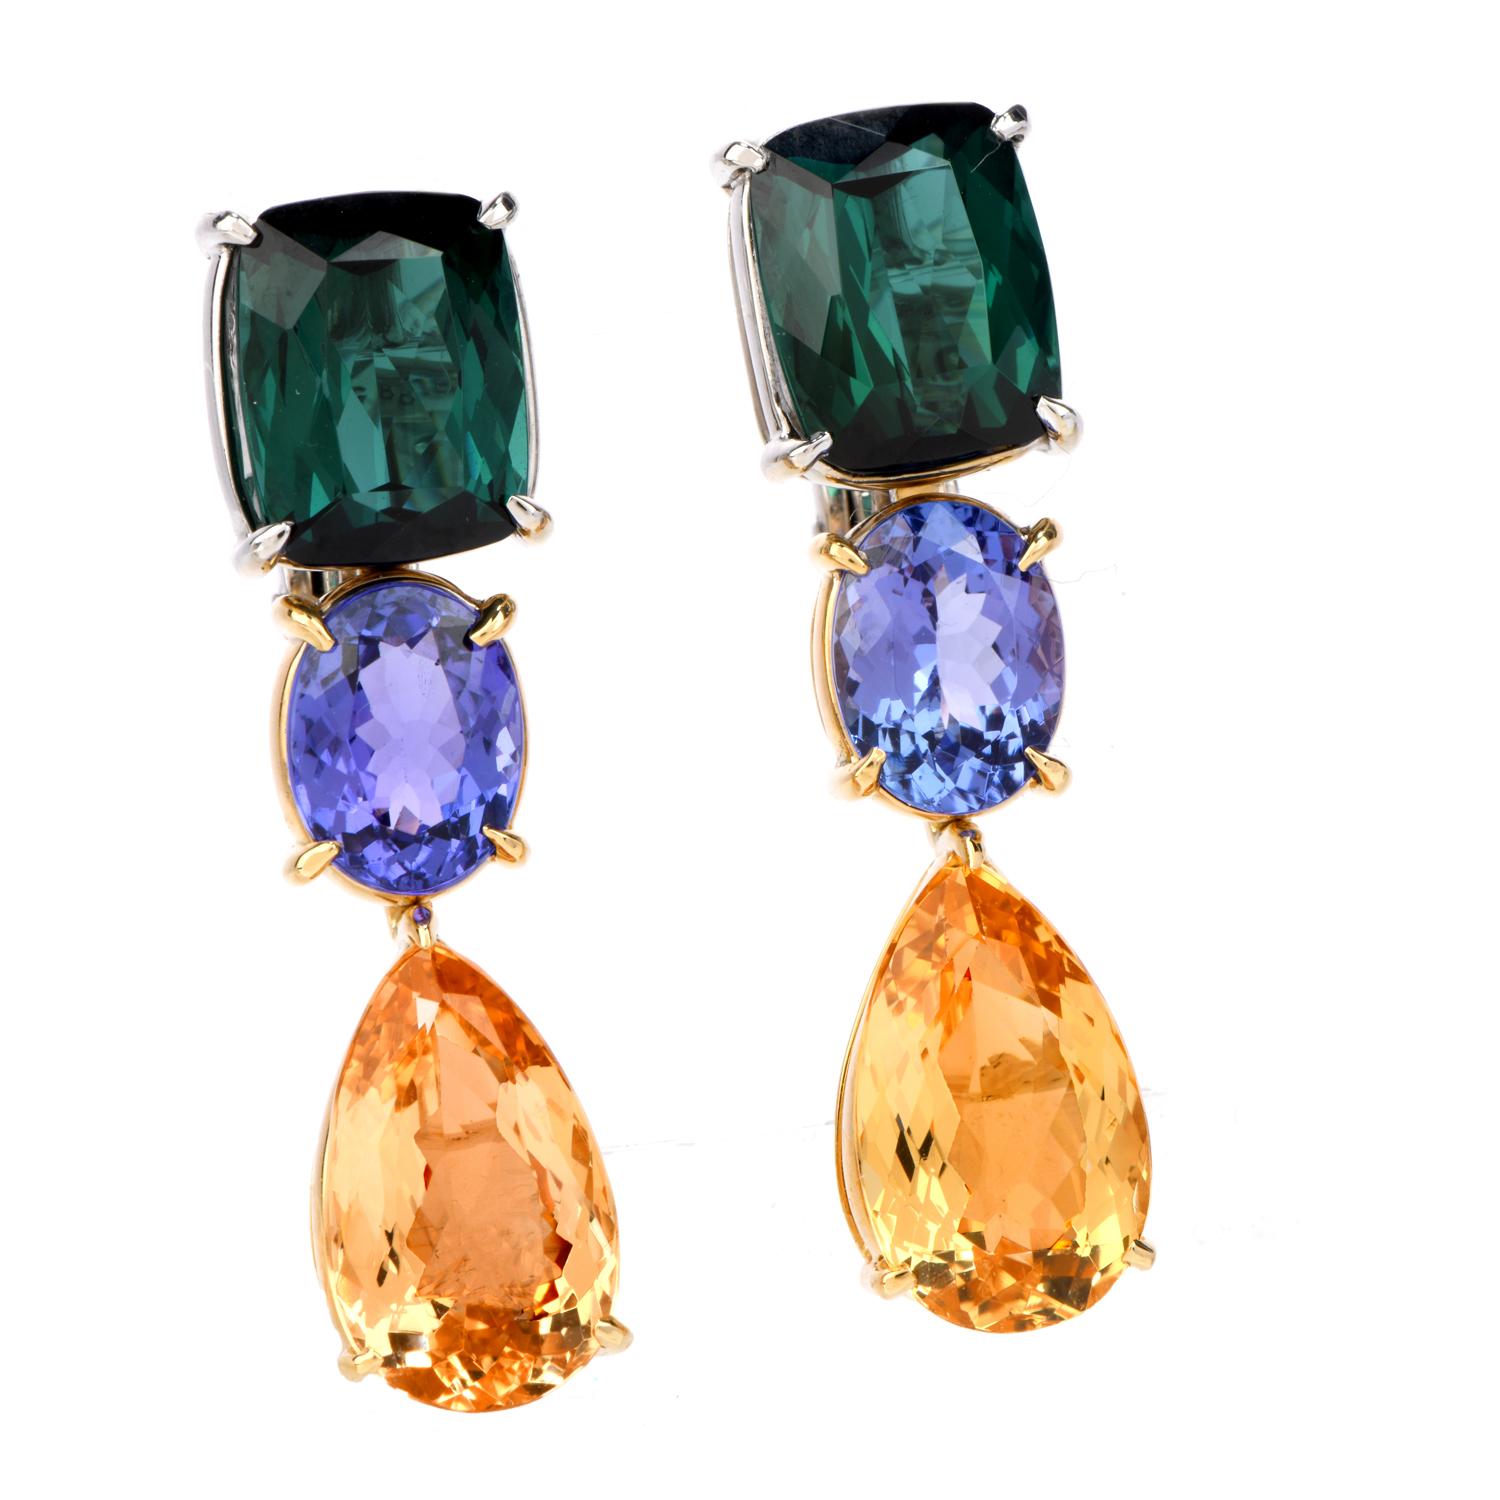 WD-PRG-02
Loose yourself in these inviting Estate Tourmaline Tanzanite & Imperial Topaz 18K Gold Drop Dangle Earrings.  These

welcoming and warm earrings are crafted in 18 karat white and yellow gold.  The top portion has two deep green genuine